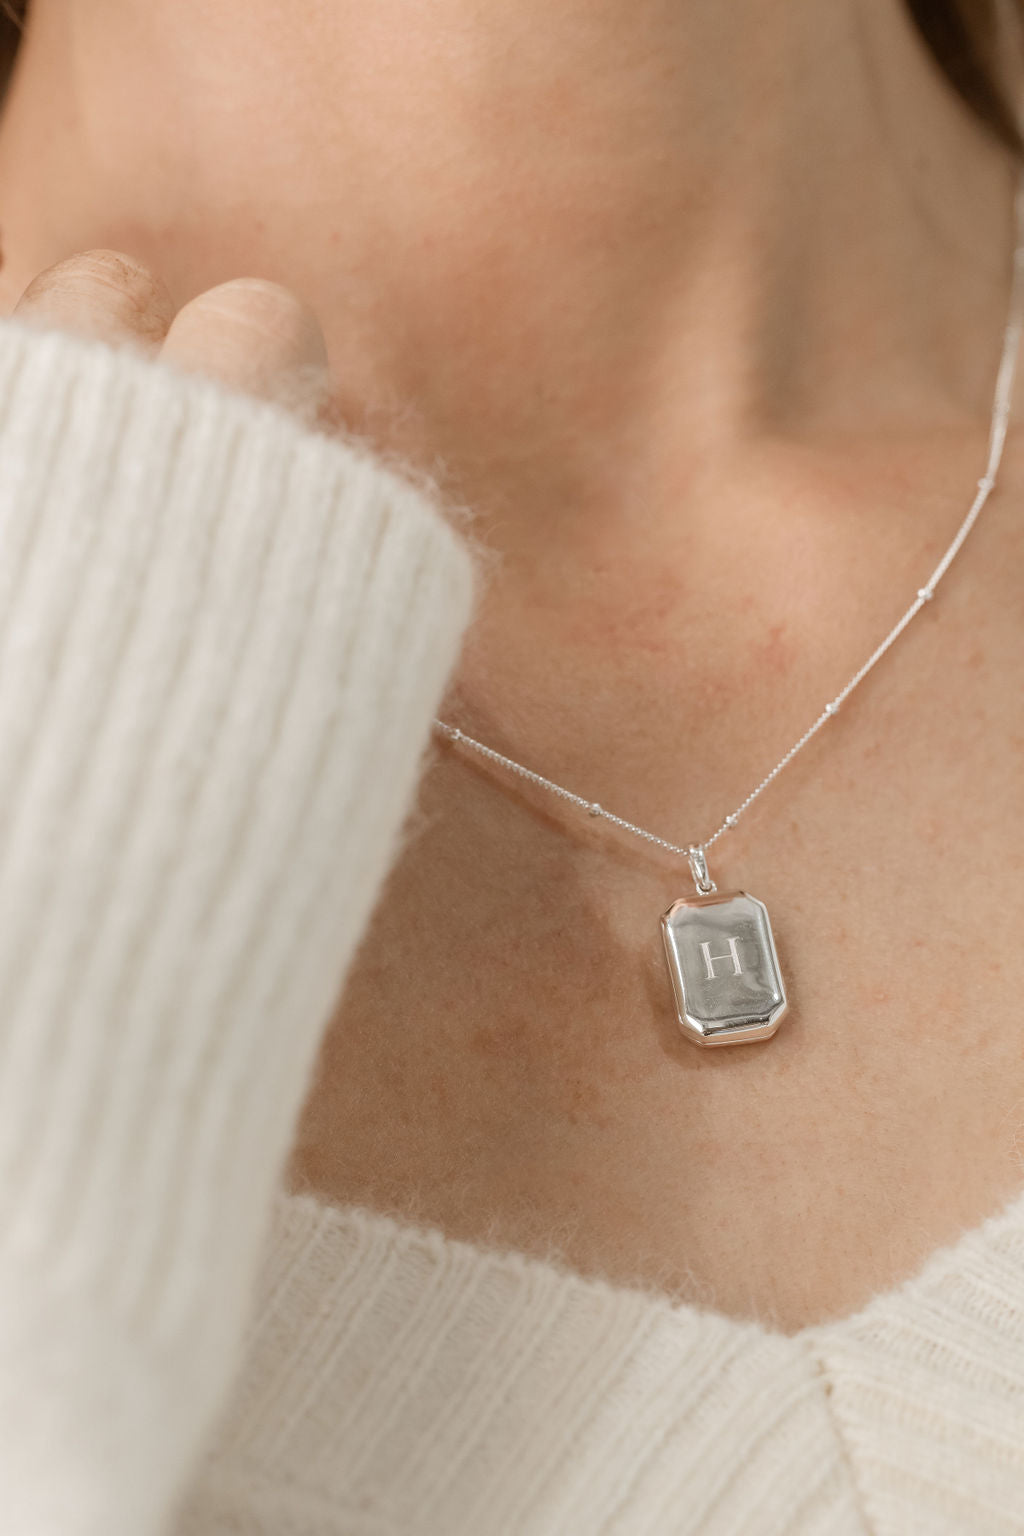 silver rectangular bevel locket engraved on bead chain necklace